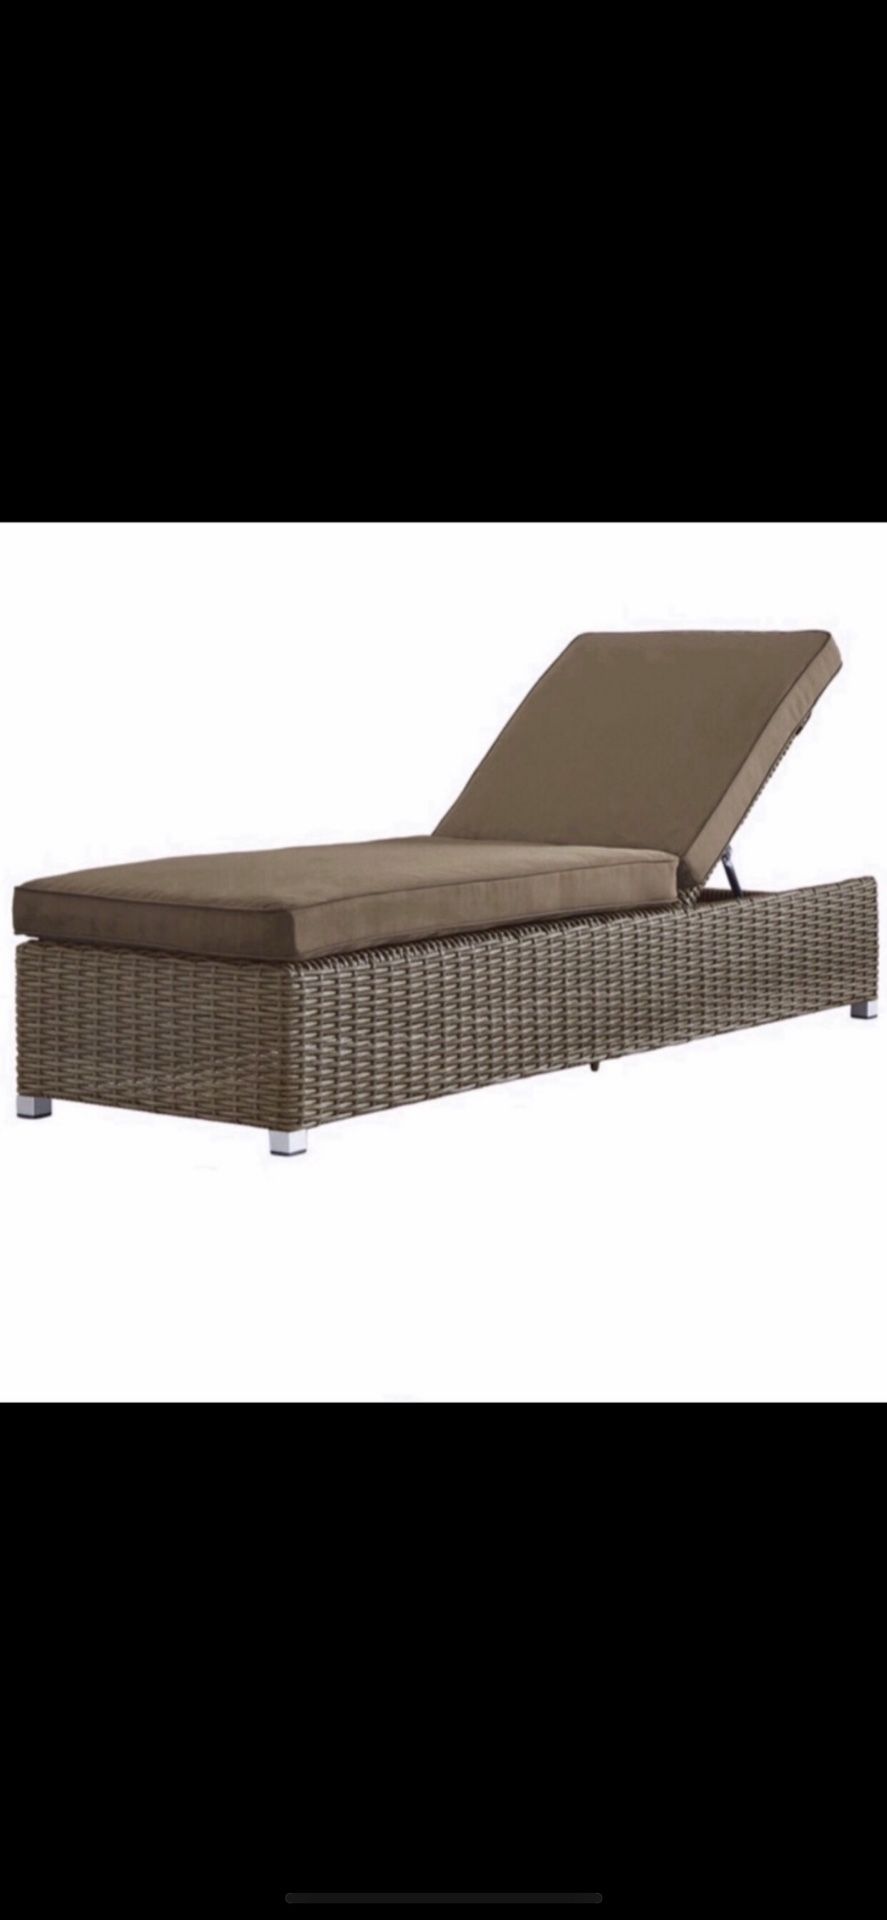 Patio Furniture Chaise Lounge With Cushion  2 Of  Them Outdoor Furniture by